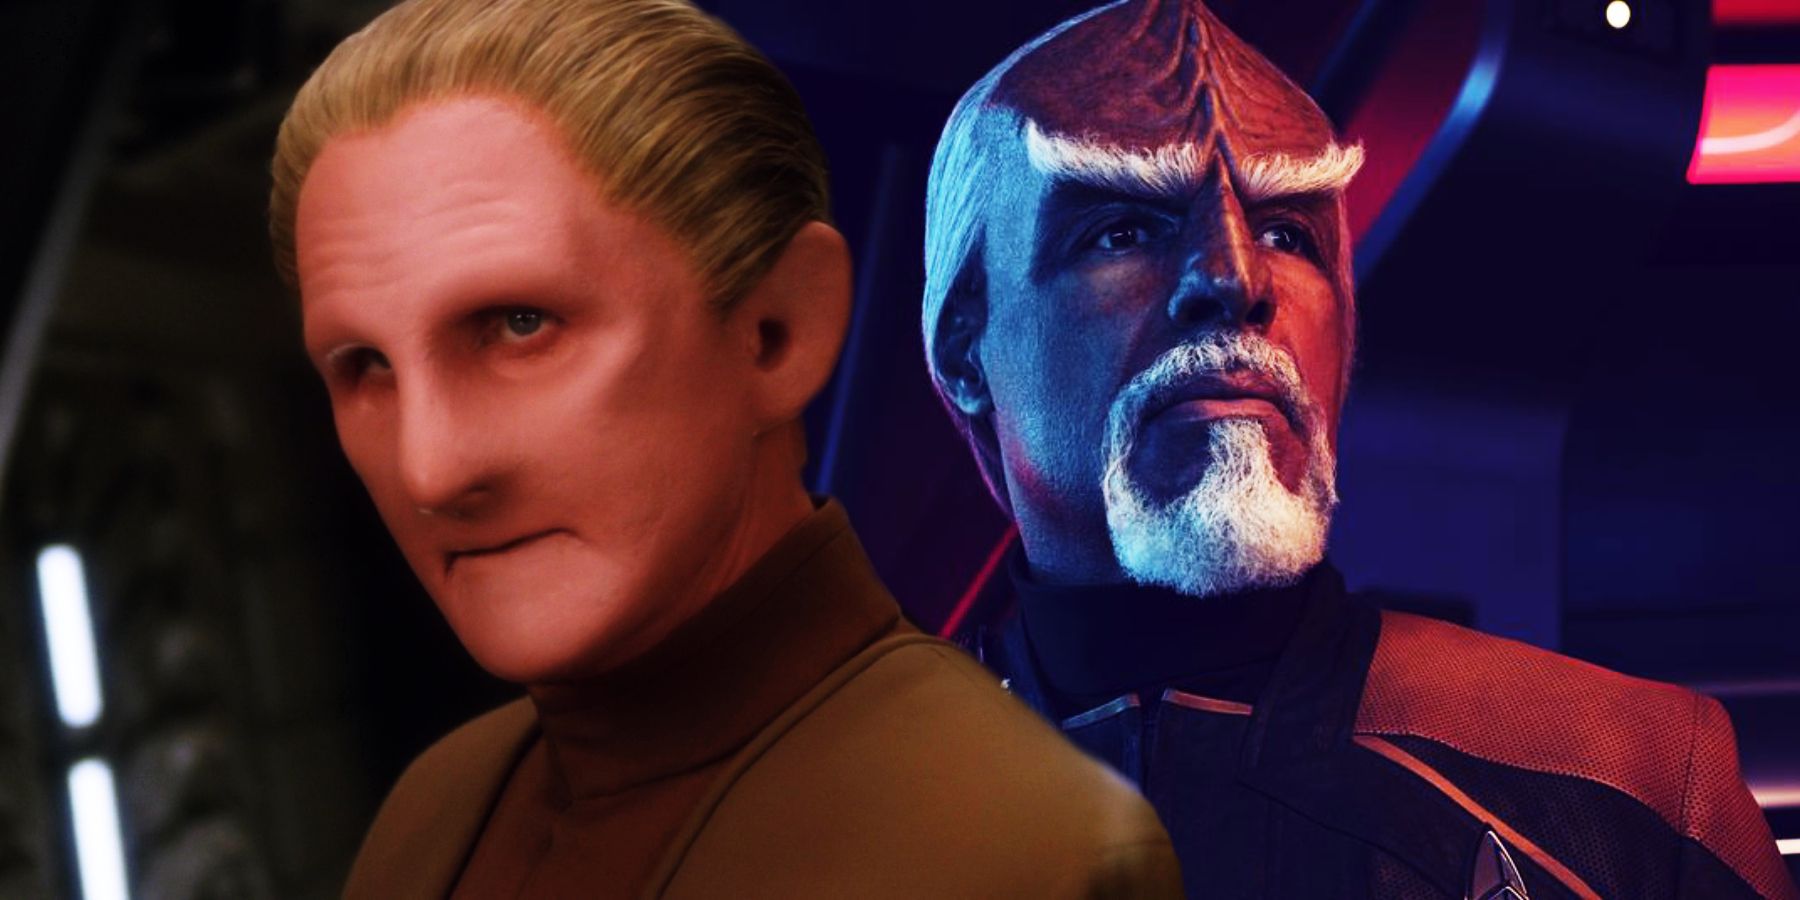 A changeling Odo and Word from DS9's Star Trek: Picard Season 3